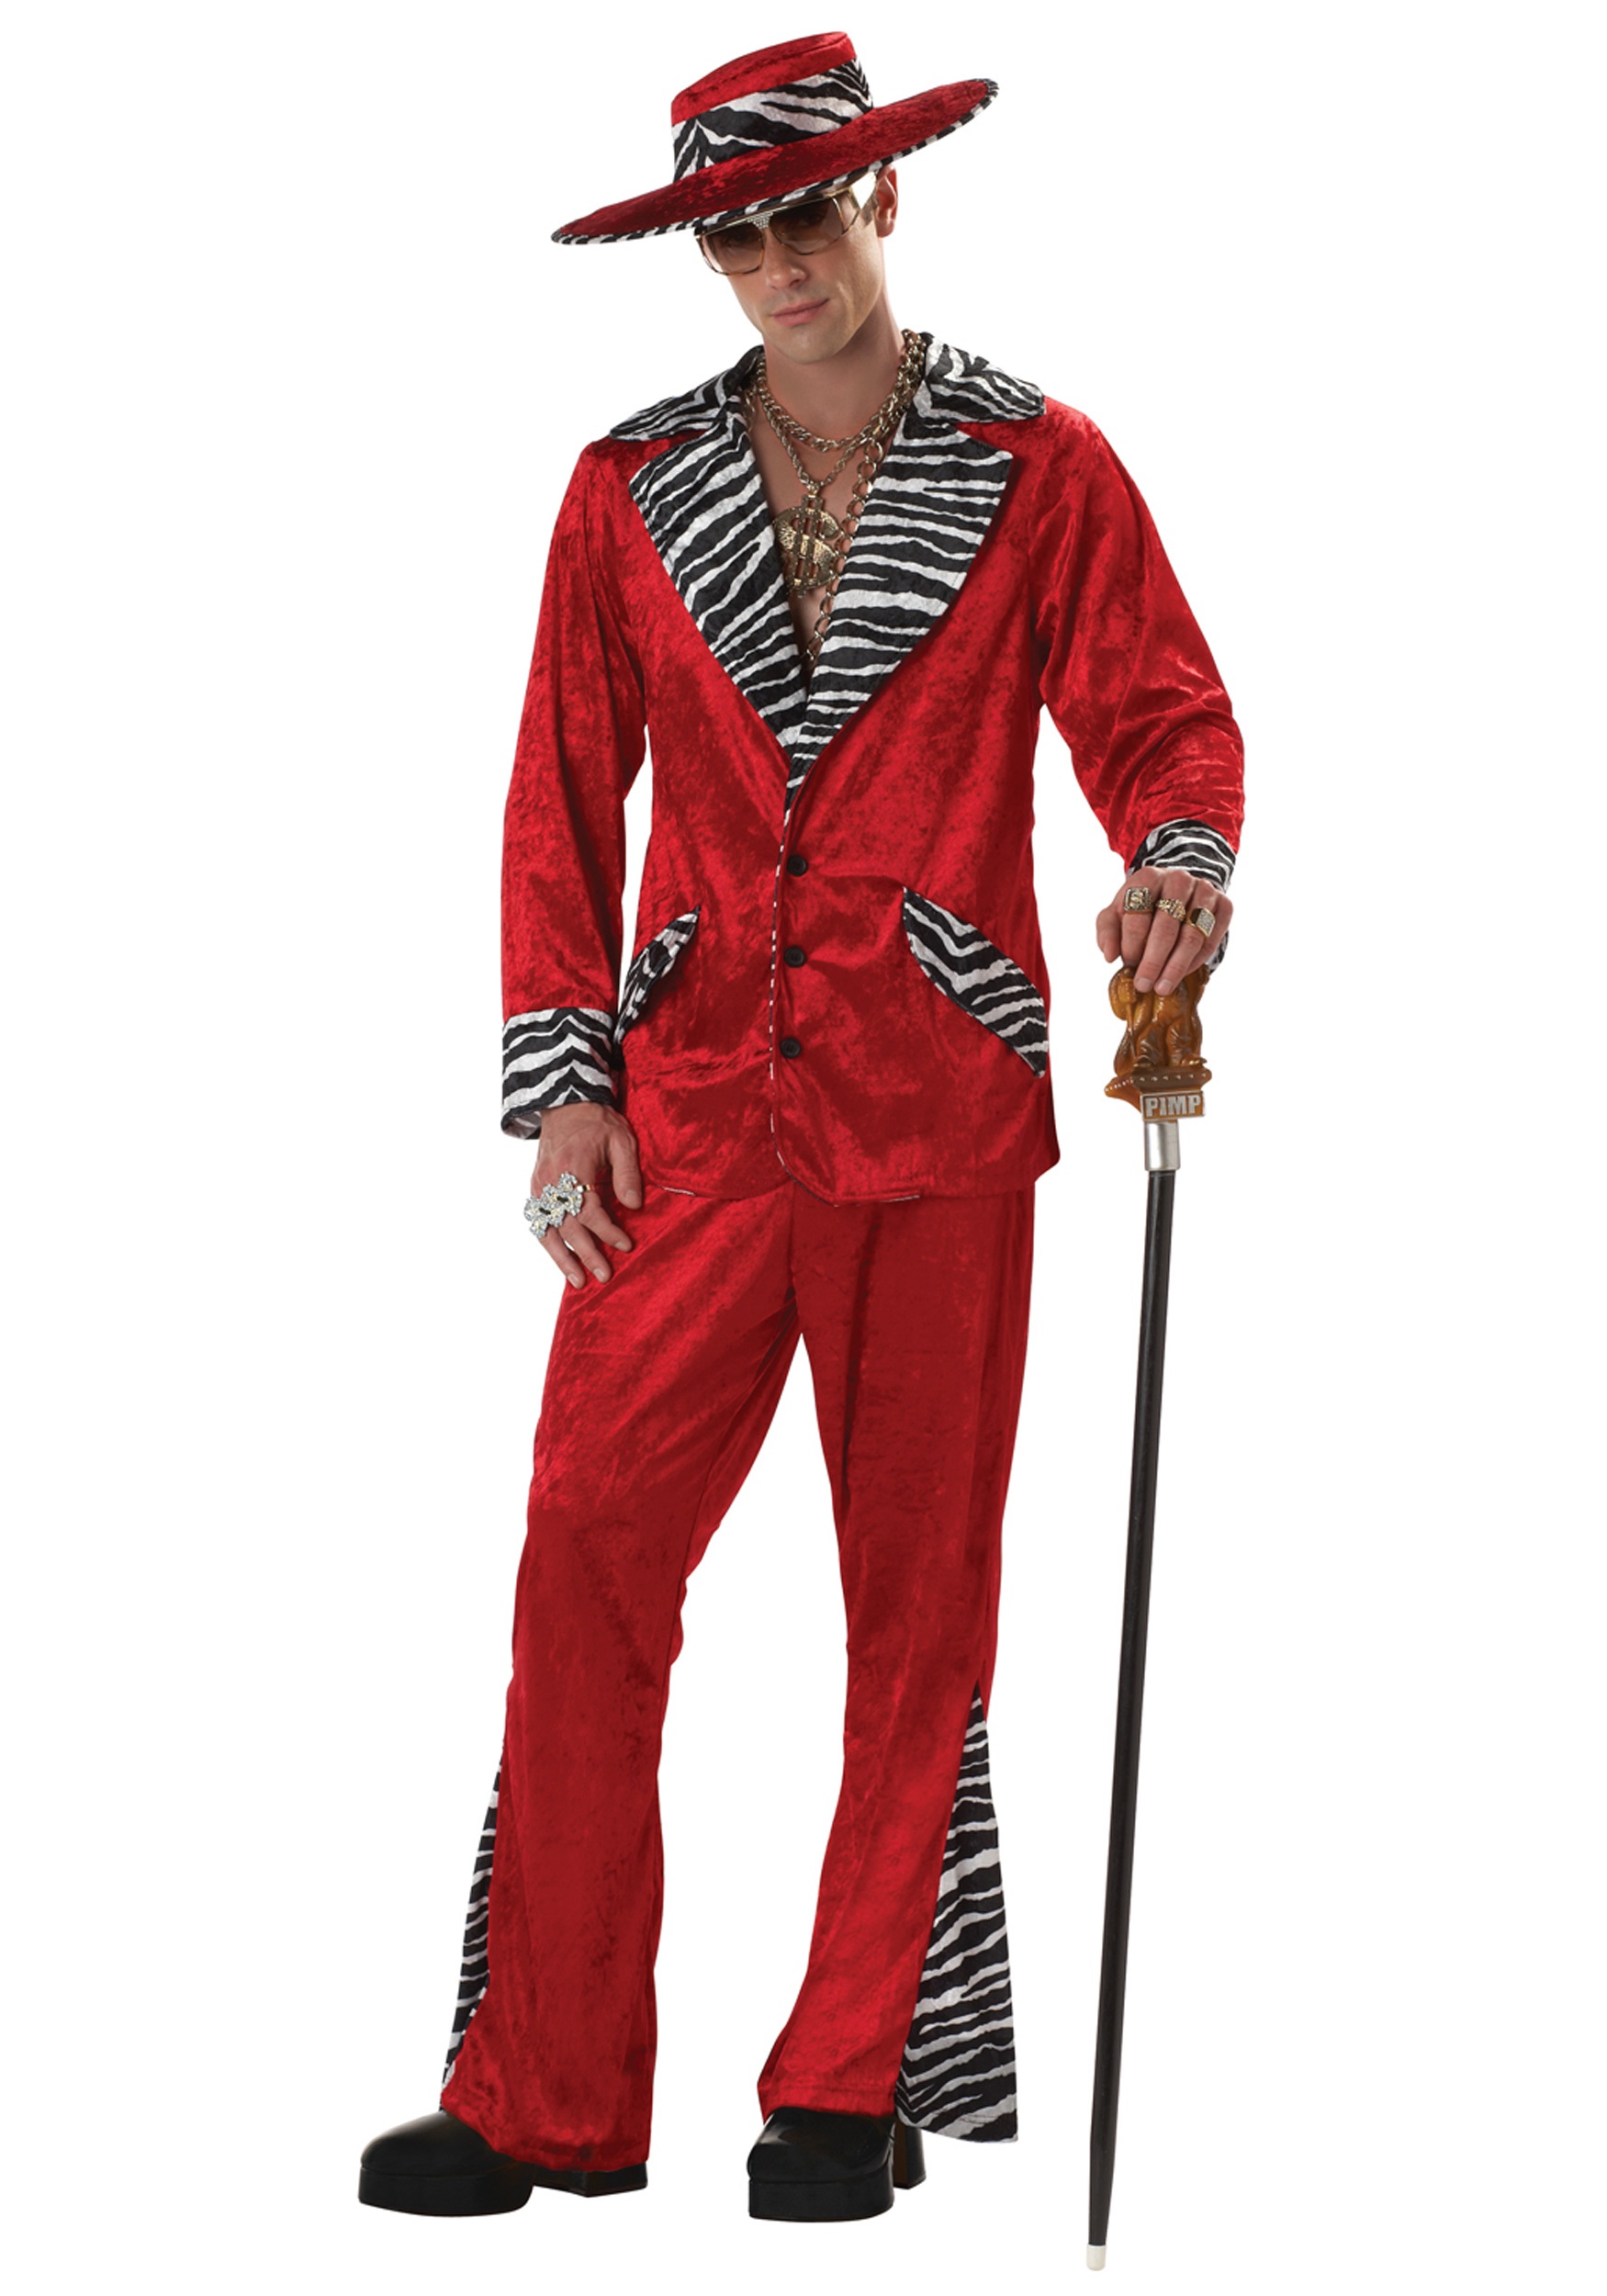 70s Costumes & Outfits For Halloween - HalloweenCostumes.com